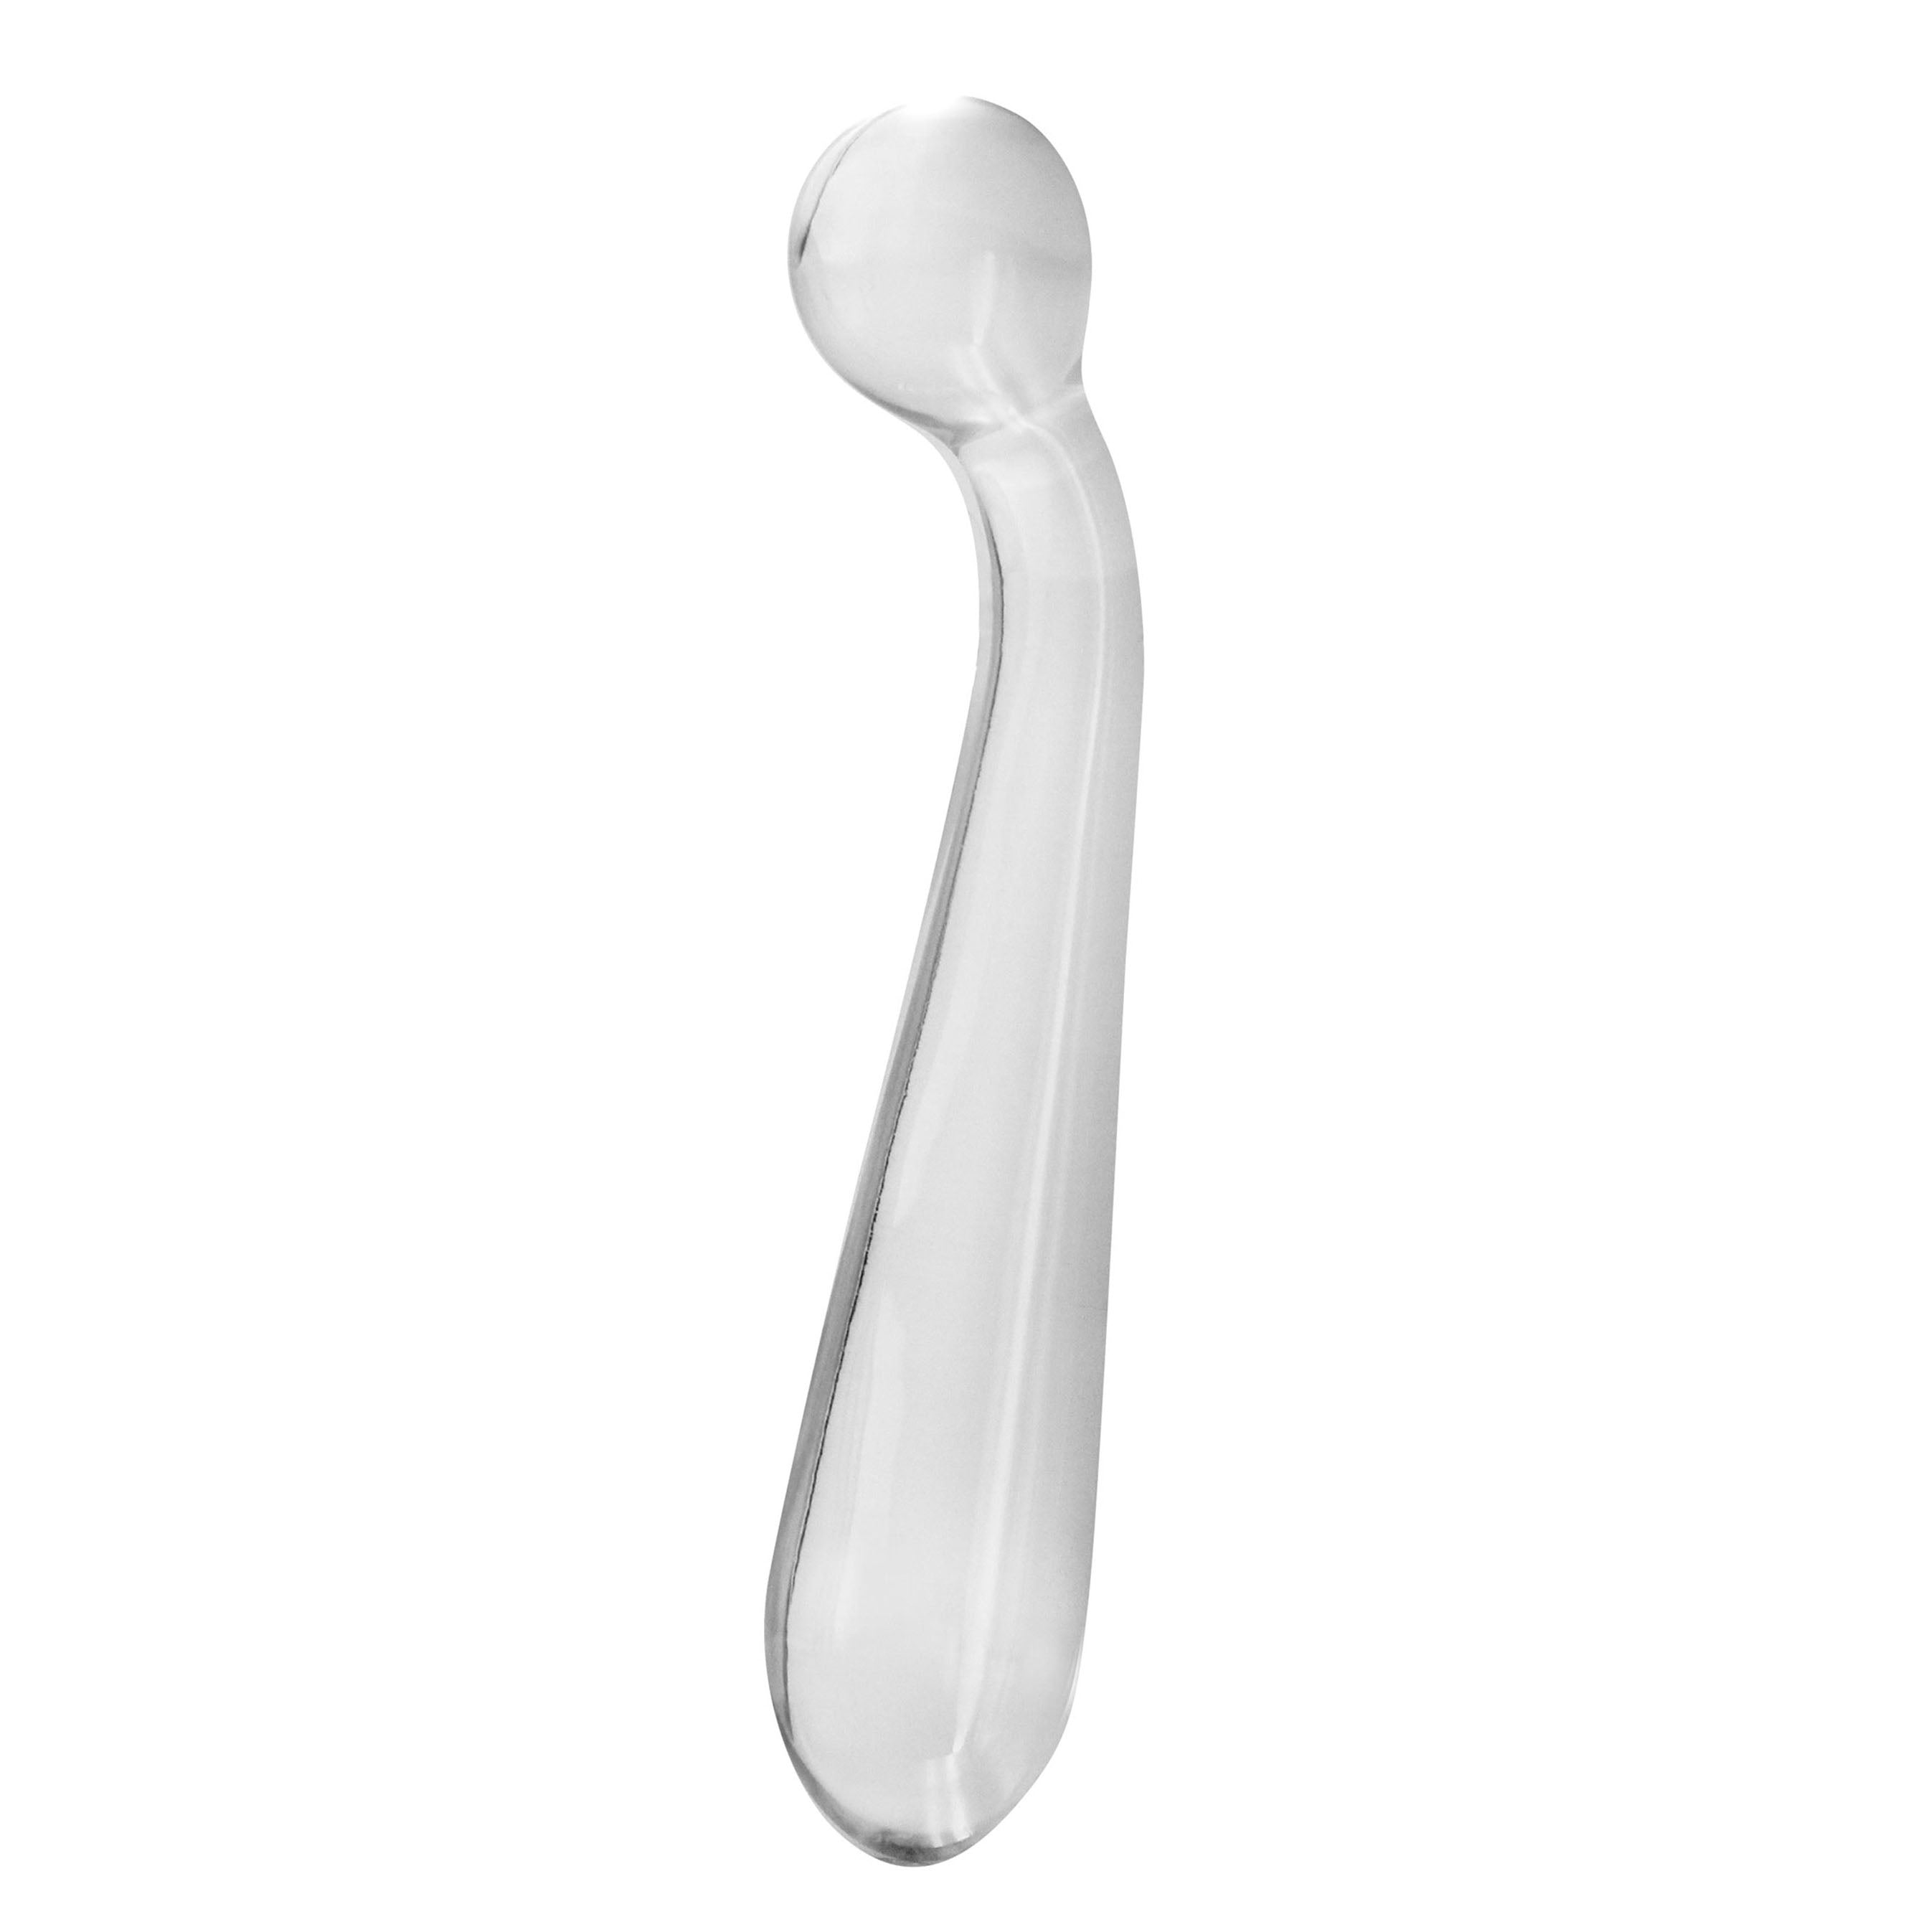 Vibrators, Sex Toy Kits and Sex Toys at Cloud9Adults - Crystal Premium Glass GWand - Buy Sex Toys Online